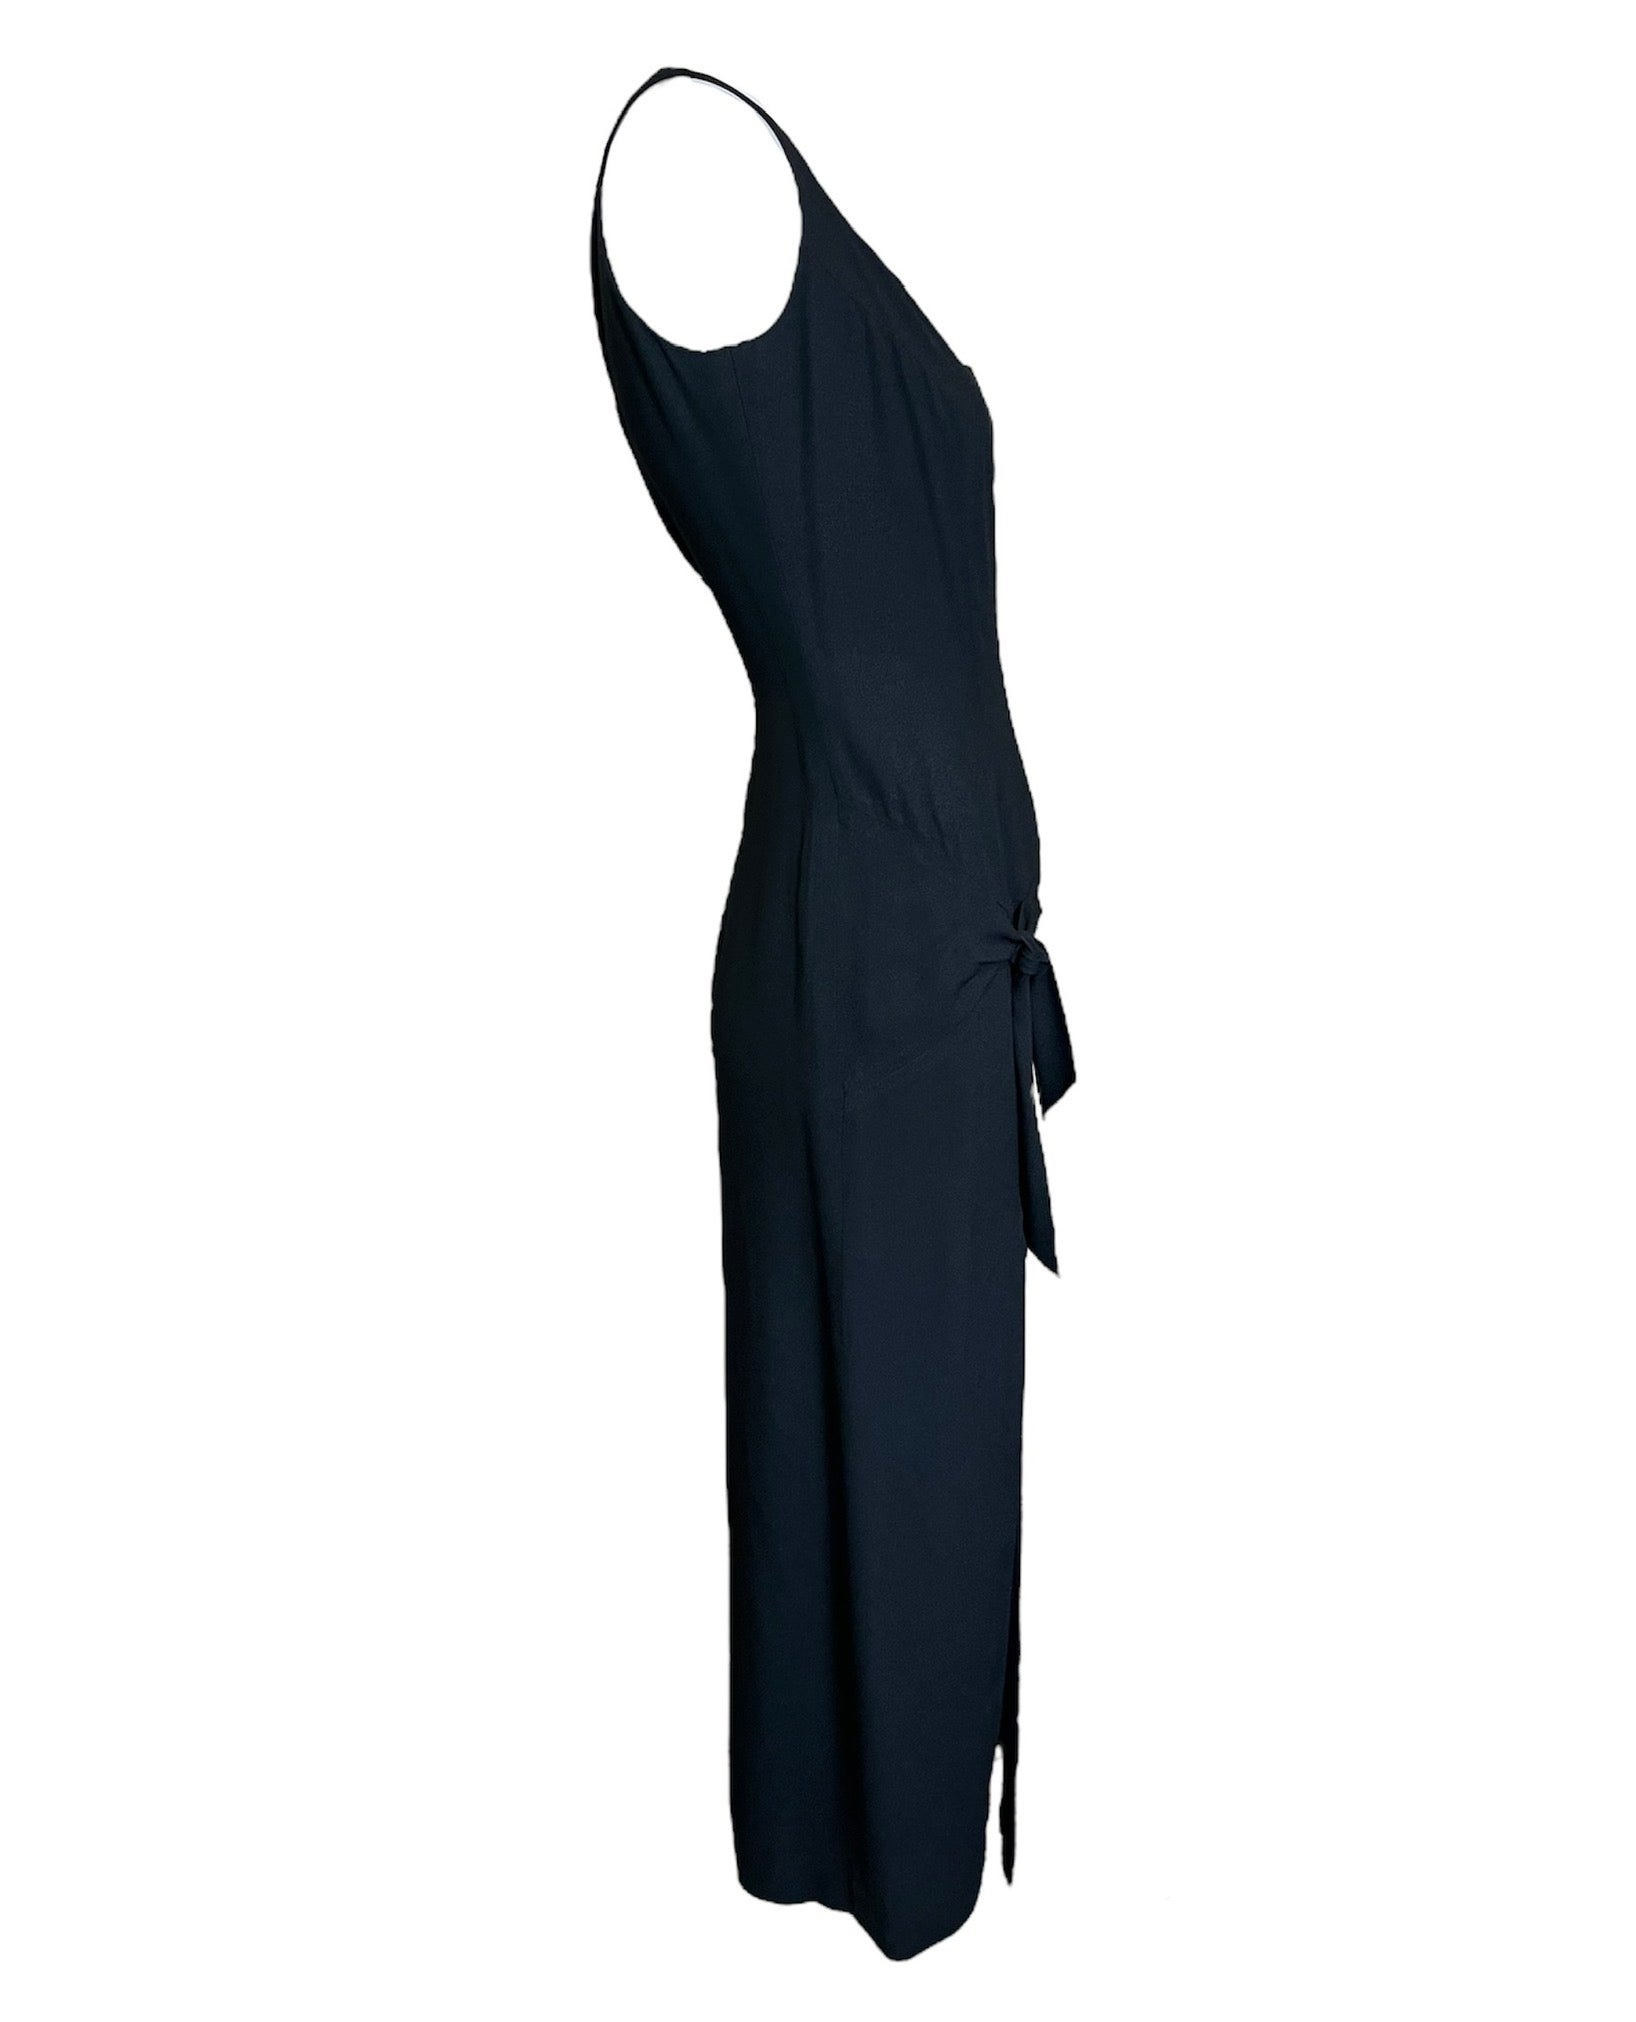 Galliano Black Crepe Silk-lined Dress with Knotted Waist SIDE PHOTO 2 OF 4